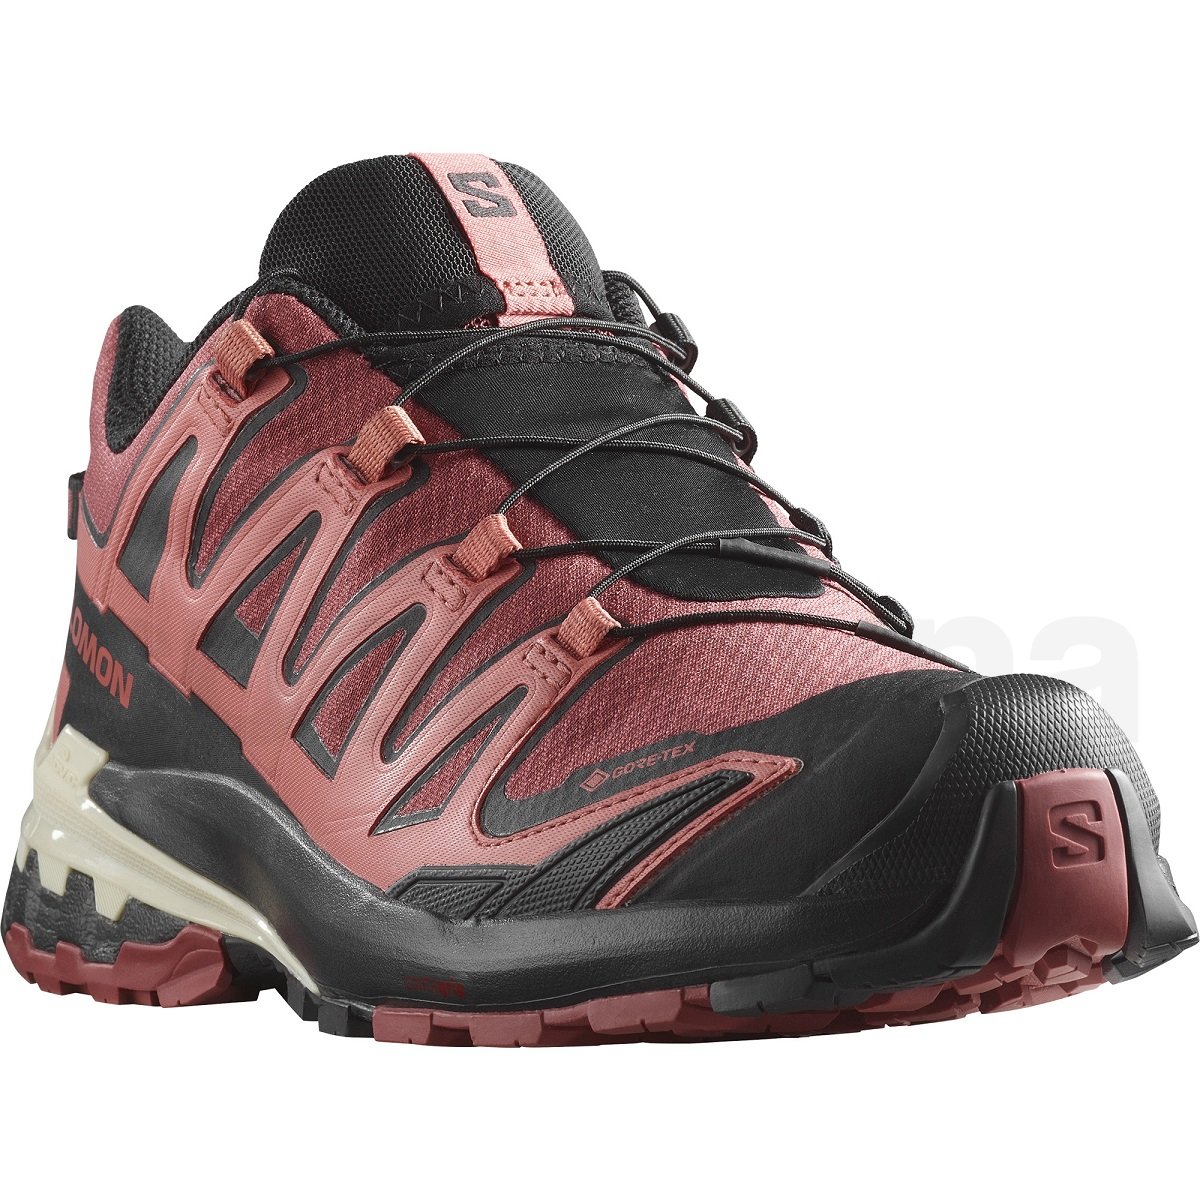 L47270900_5_GHO_XA PRO 3D V9 GTX WCow Hide_Black_Faded Rose.png.high-res